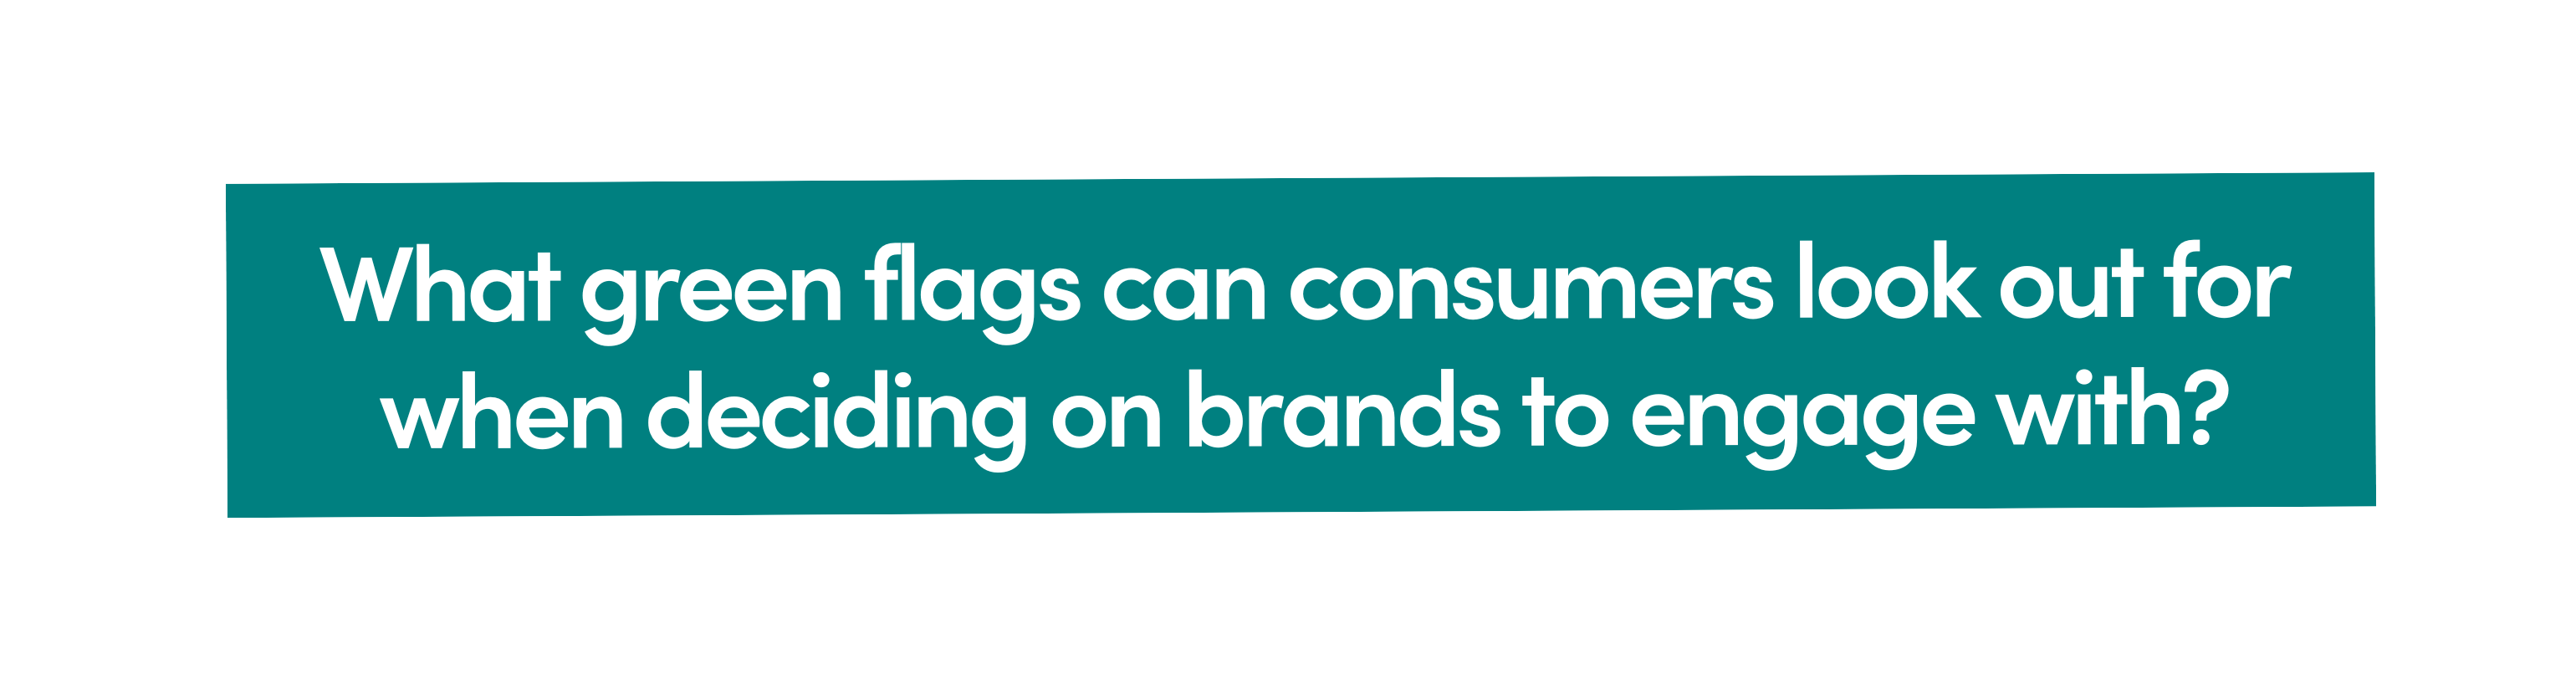 What green flags can consumers look out for when deciding on brands to engage with?